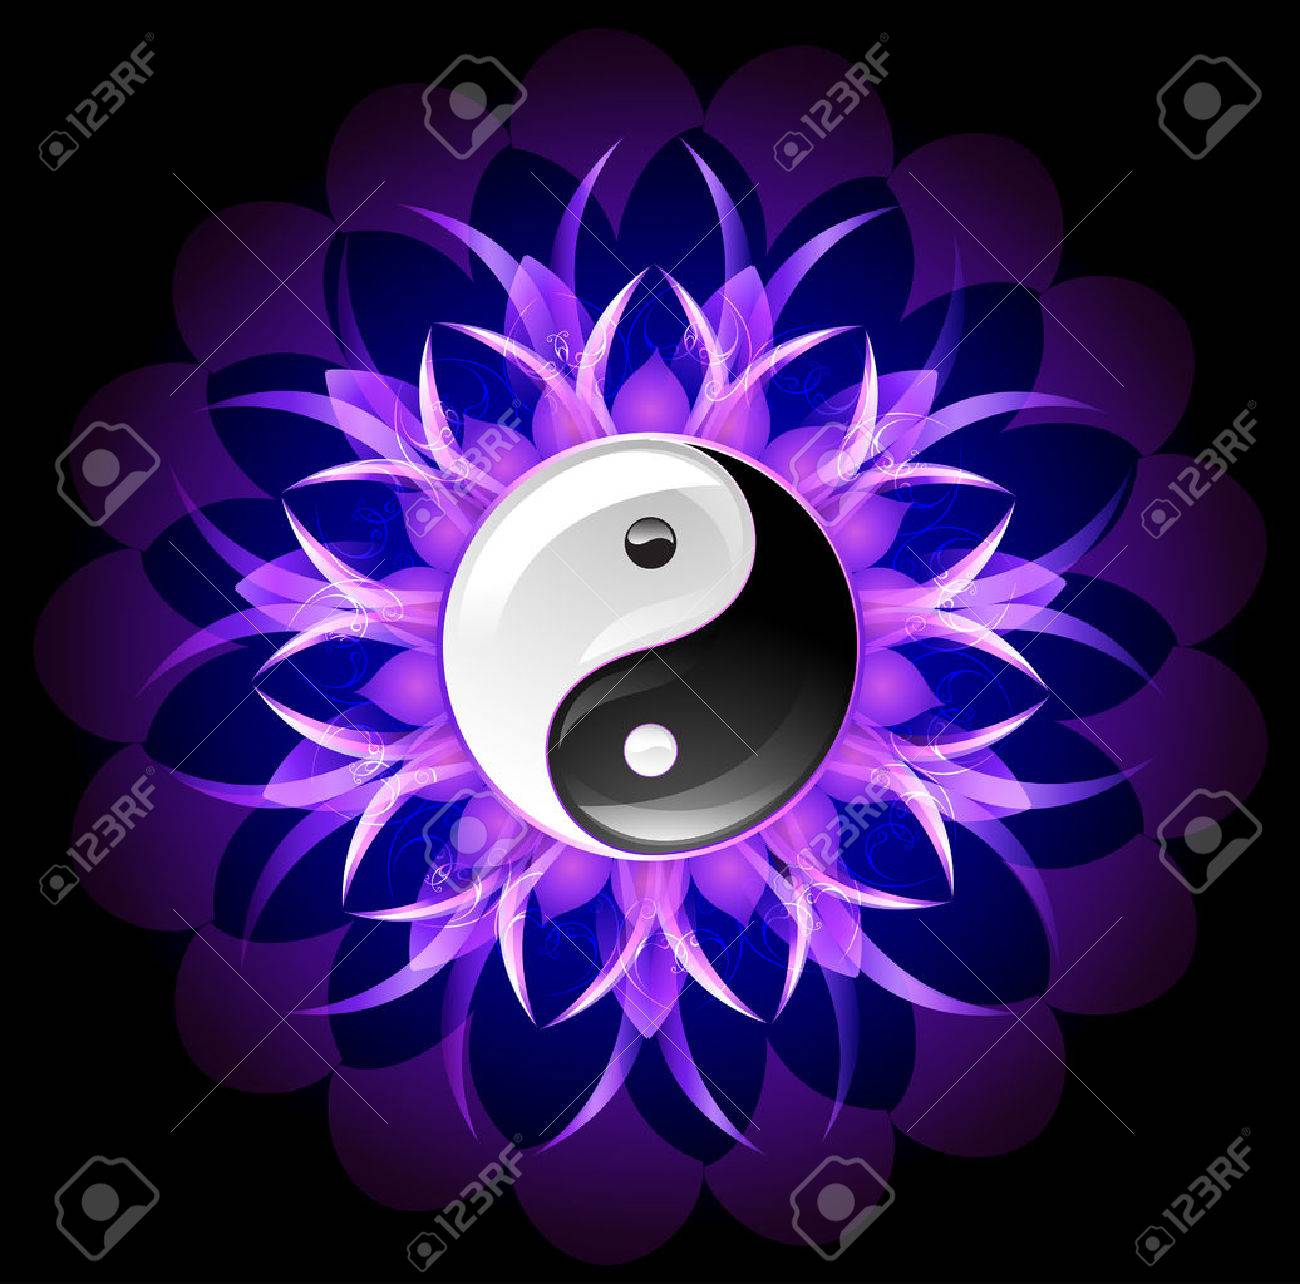 Glowing Purple Lotus With Yin Yang Symbol On A Black Background